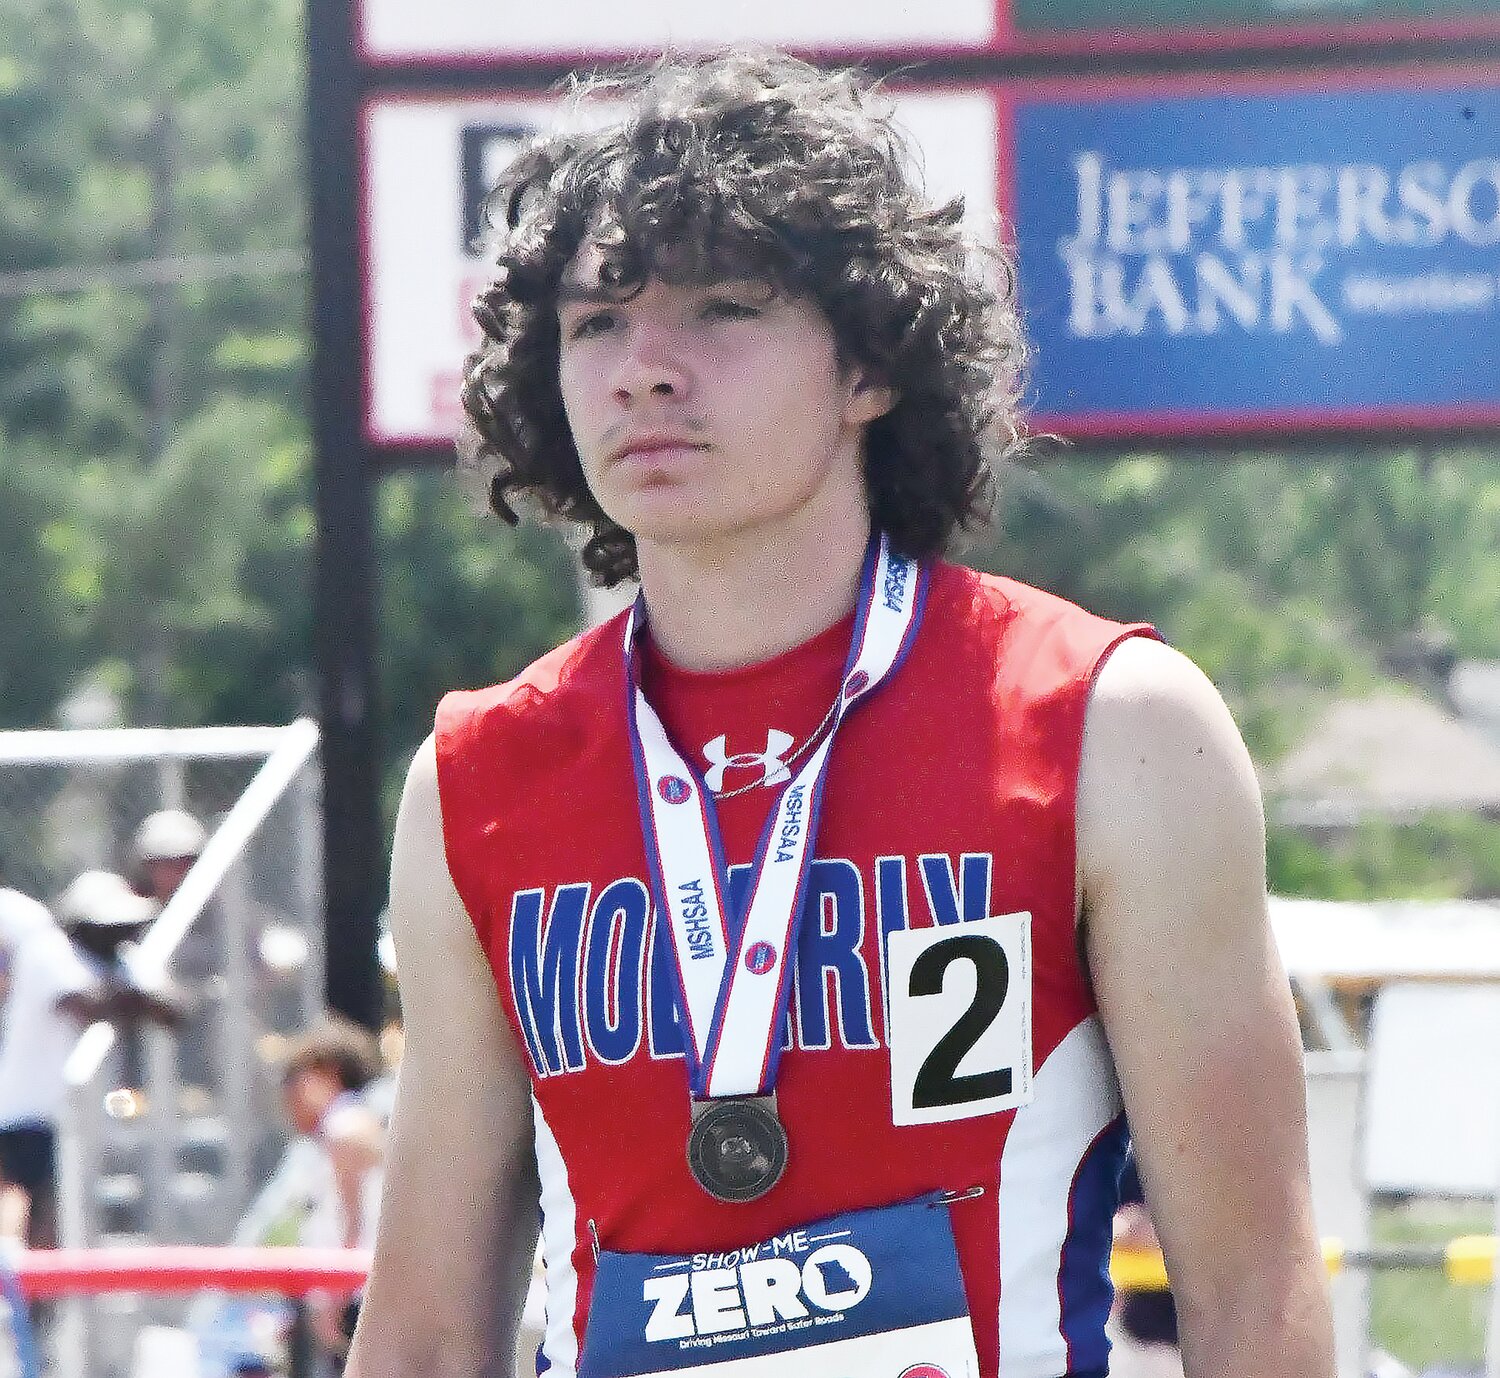 Moberly's Brett Gelina listens as his name is called as Class 4 200-meter dash champion, clocking in with a season-best time of 21.33 seconds.